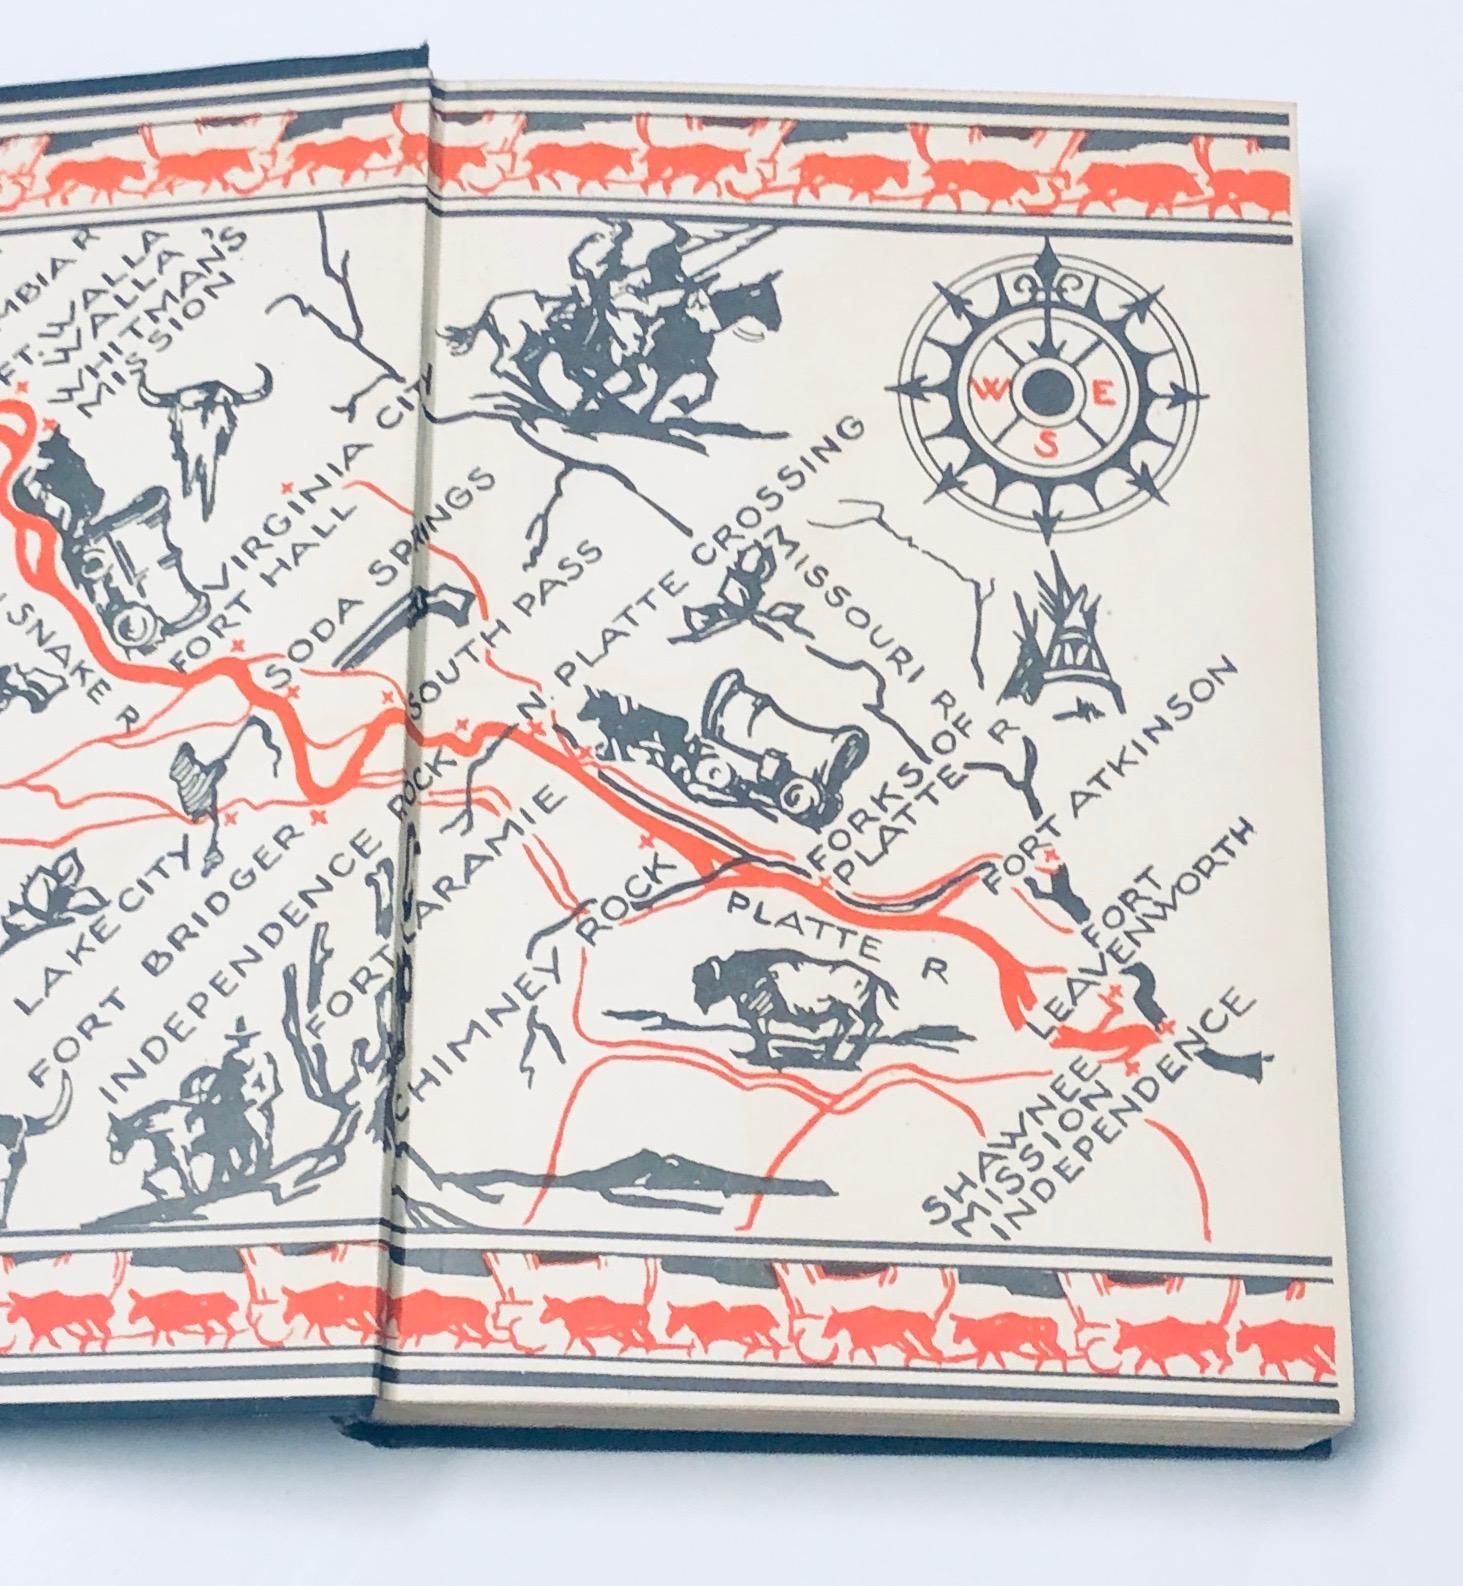 The Road to Oregon by W.J. Ghent (1934) A Chronicle of the Great Emigrant Trail